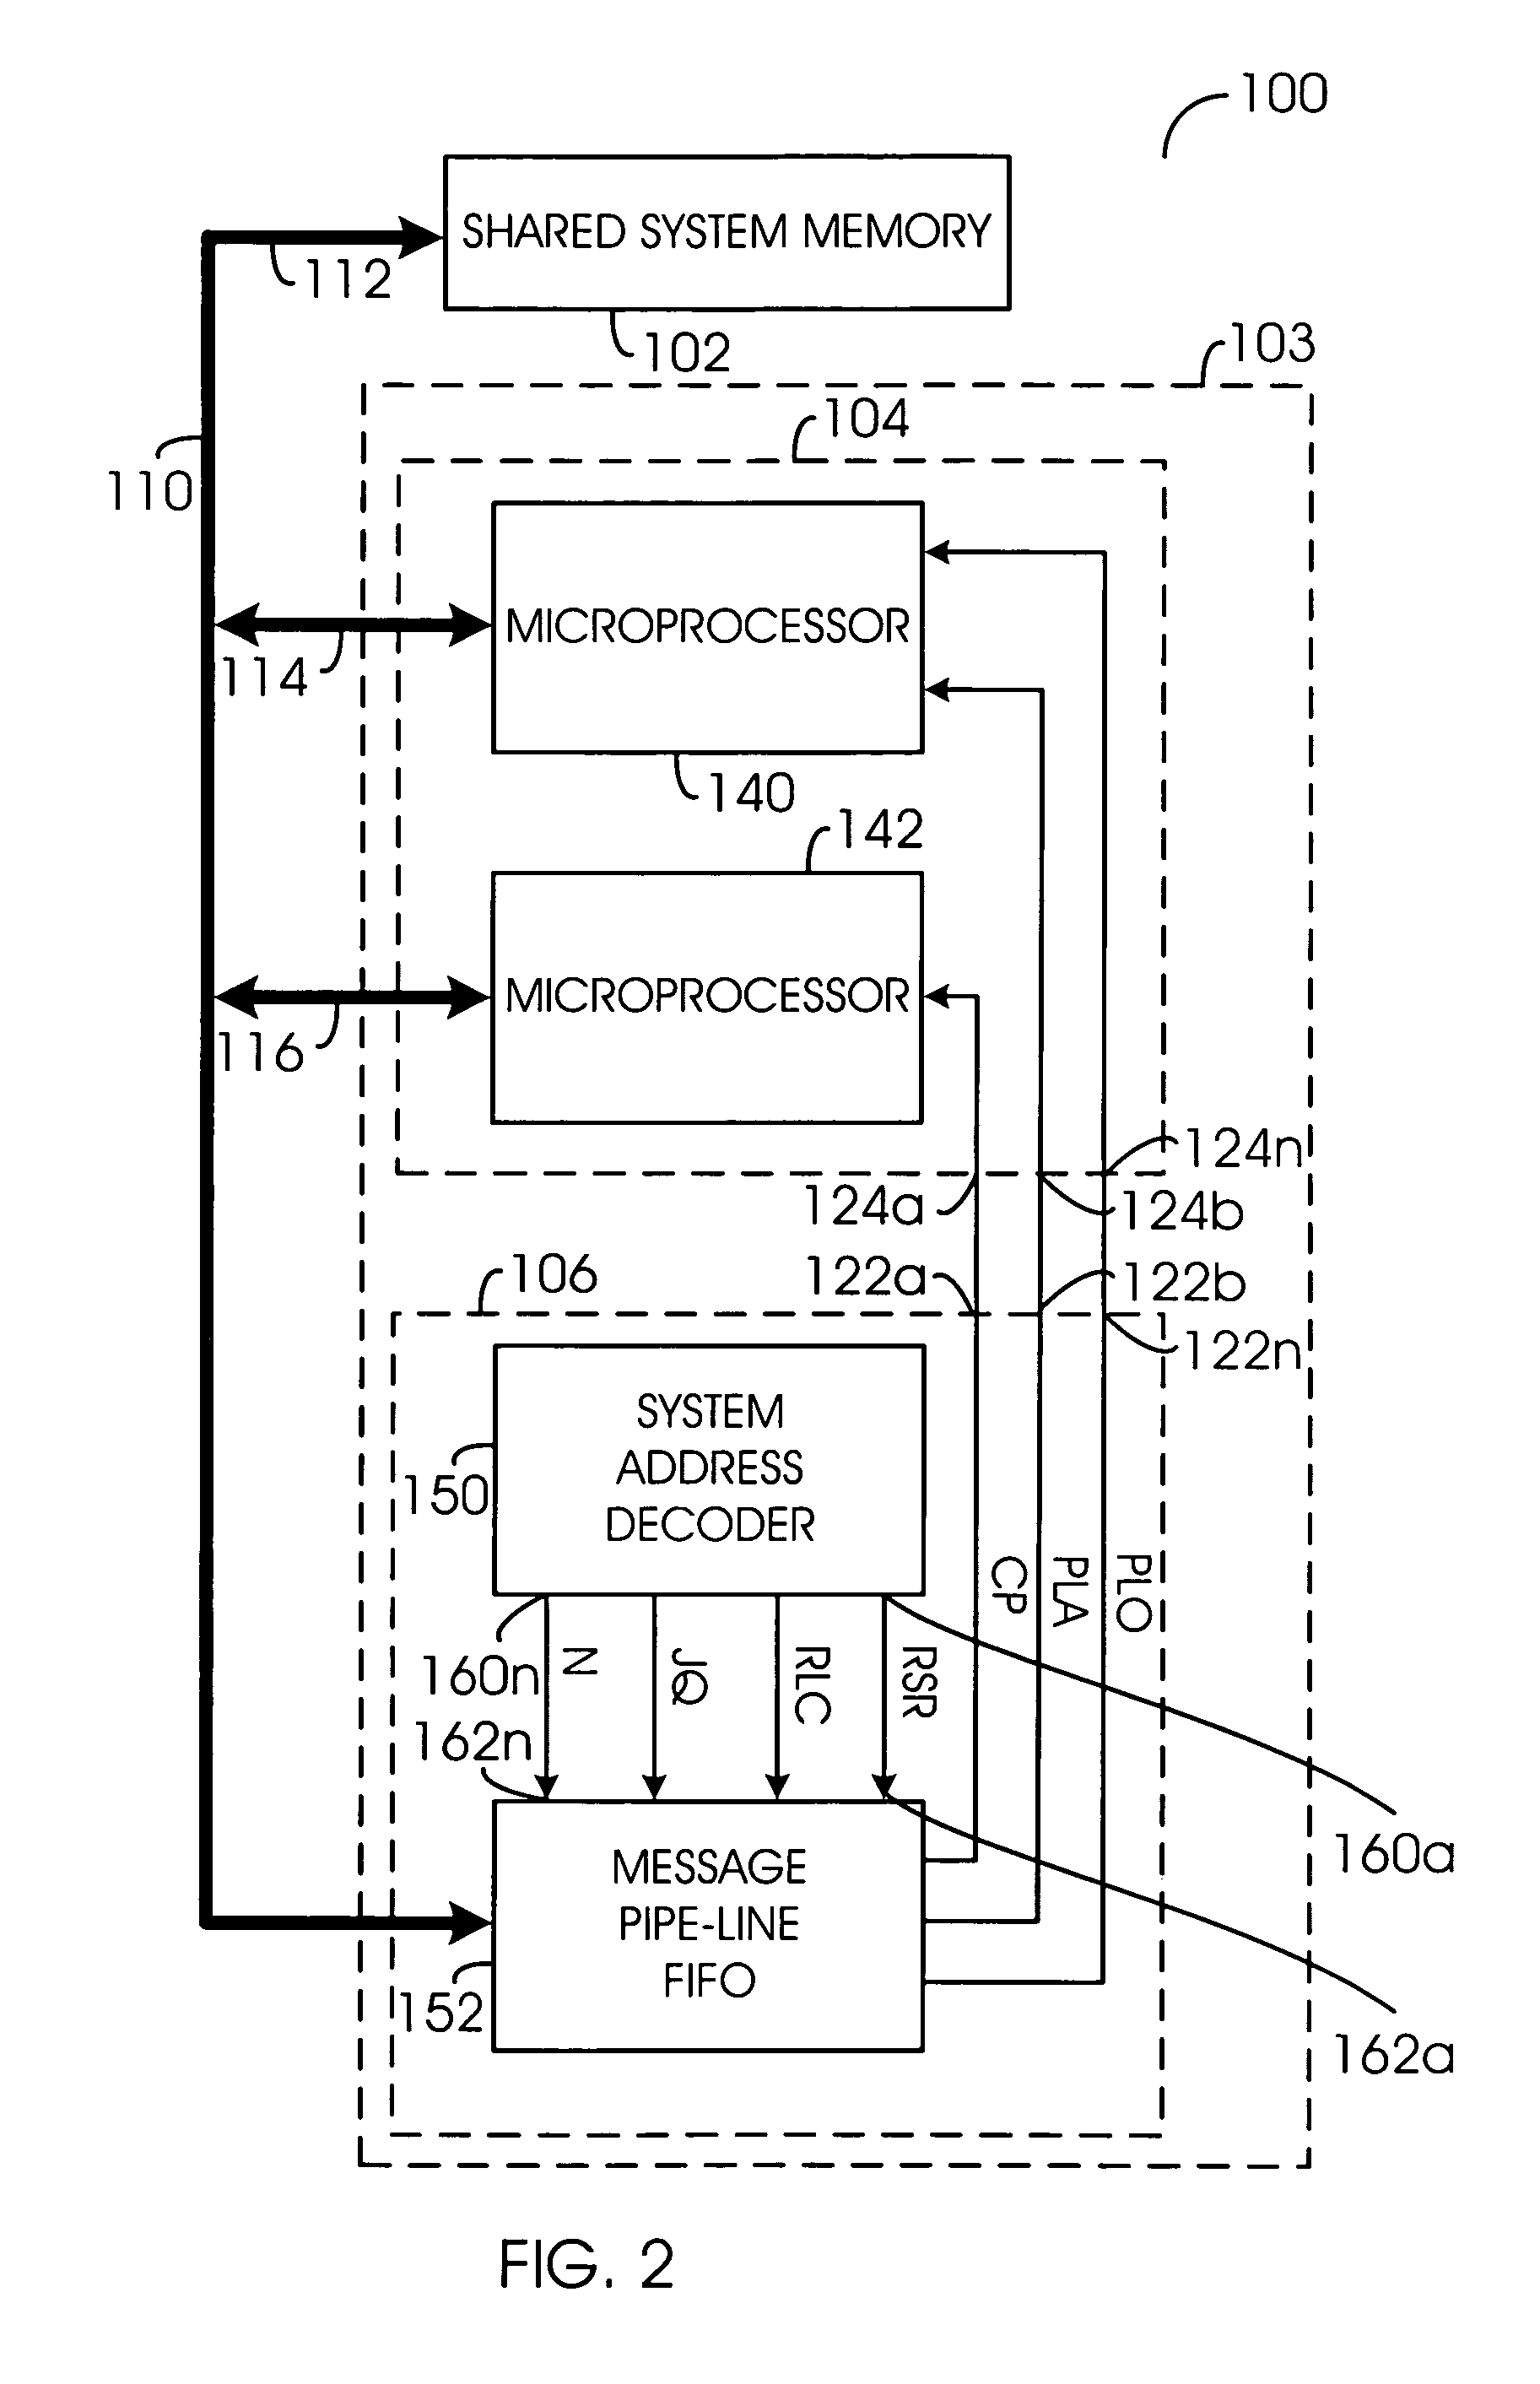 Method for multiprocessor communication within a shared memory architecture